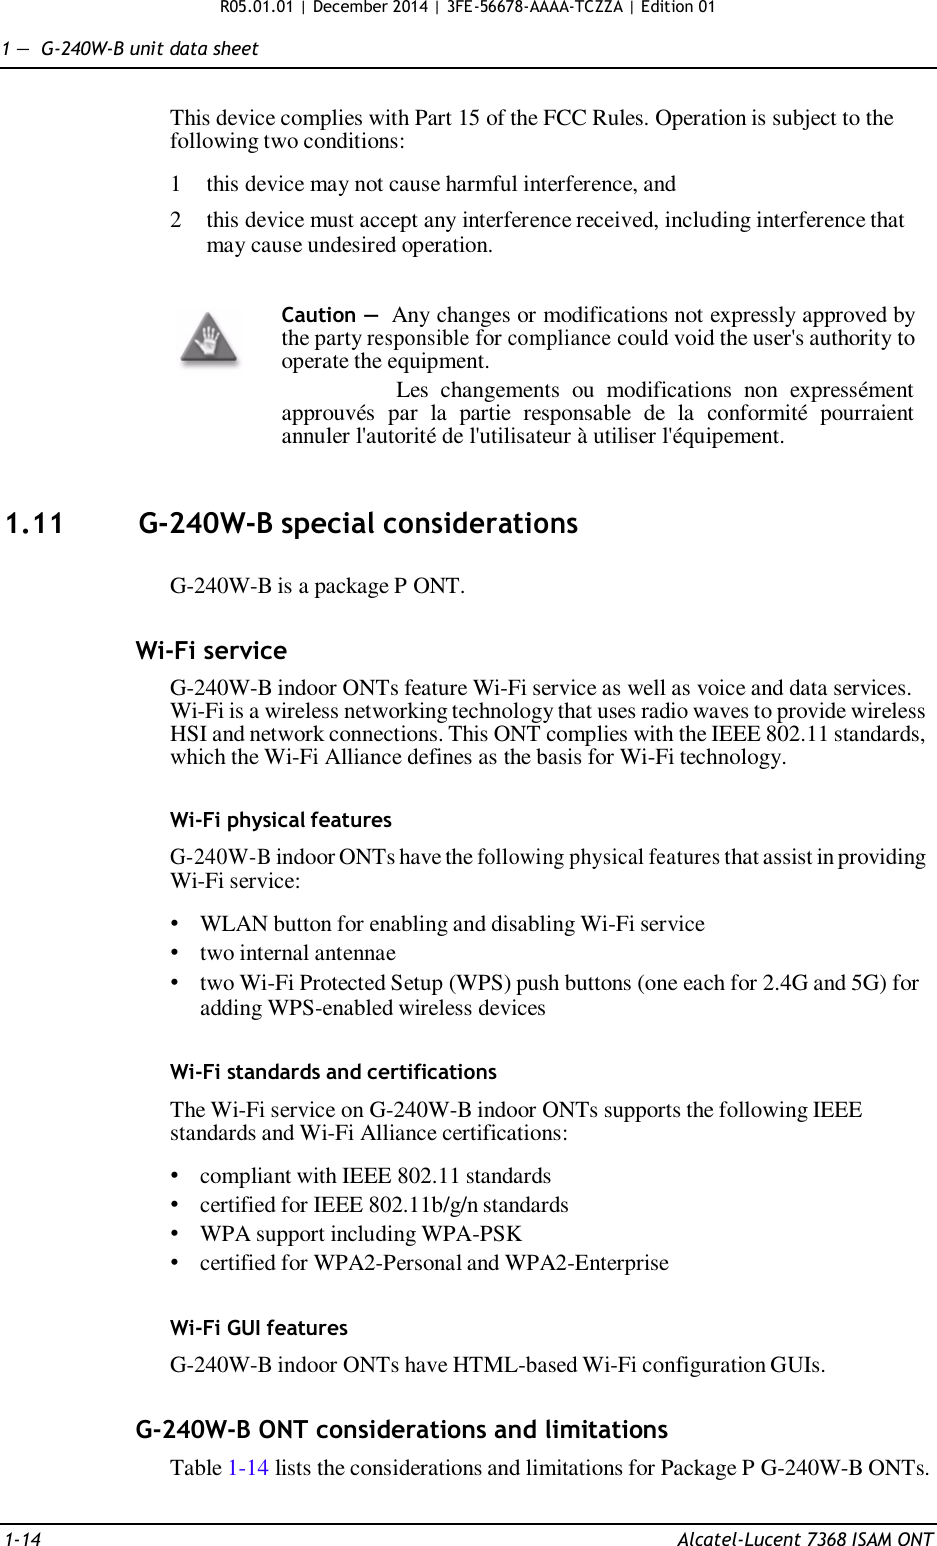 R05.01.01 | December 2014 | 3FE-56678-AAAA-TCZZA | Edition 01  1 —  G-240W-B unit data sheet   This device complies with Part 15 of the FCC Rules. Operation is subject to the following two conditions:  1  this device may not cause harmful interference, and  2  this device must accept any interference received, including interference that may cause undesired operation.   Caution — Any changes or modifications not expressly approved by the party responsible for compliance could void the user&apos;s authority to operate the equipment. Les  changements  ou  modifications  non  expressément approuvés  par  la  partie  responsable  de  la  conformité  pourraient annuler l&apos;autorité de l&apos;utilisateur à utiliser l&apos;équipement.    1.11  G-240W-B special considerations   G-240W-B is a package P ONT.   Wi-Fi service  G-240W-B indoor ONTs feature Wi-Fi service as well as voice and data services. Wi-Fi is a wireless networking technology that uses radio waves to provide wireless HSI and network connections. This ONT complies with the IEEE 802.11 standards, which the Wi-Fi Alliance defines as the basis for Wi-Fi technology.   Wi-Fi physical features  G-240W-B indoor ONTs have the following physical features that assist in providing Wi-Fi service:  • WLAN button for enabling and disabling Wi-Fi service • two internal antennae • two Wi-Fi Protected Setup (WPS) push buttons (one each for 2.4G and 5G) for adding WPS-enabled wireless devices   Wi-Fi standards and certifications  The Wi-Fi service on G-240W-B indoor ONTs supports the following IEEE standards and Wi-Fi Alliance certifications:  • compliant with IEEE 802.11 standards • certified for IEEE 802.11b/g/n standards • WPA support including WPA-PSK • certified for WPA2-Personal and WPA2-Enterprise   Wi-Fi GUI features  G-240W-B indoor ONTs have HTML-based Wi-Fi configuration GUIs.   G-240W-B ONT considerations and limitations Table 1-14 lists the considerations and limitations for Package P G-240W-B ONTs.   1-14  Alcatel-Lucent 7368 ISAM ONT 